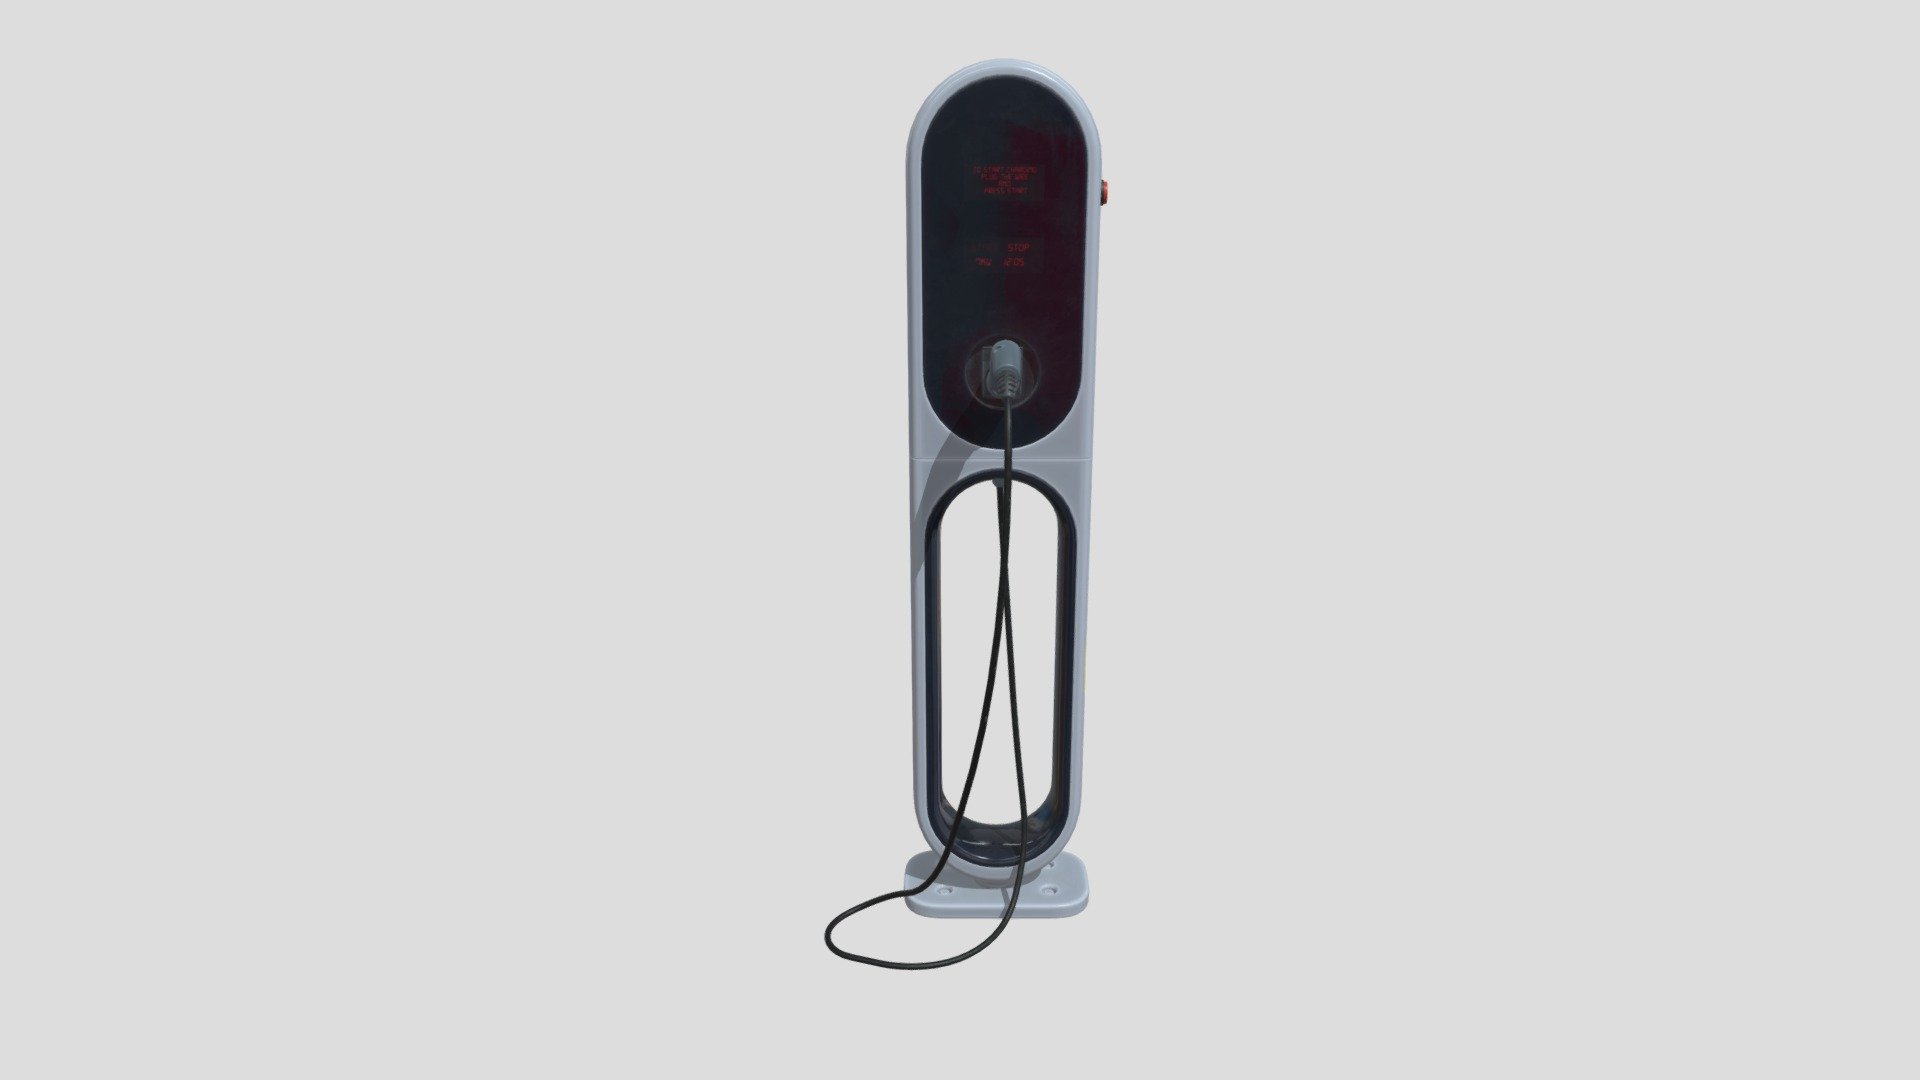 Highly detailed 3d model of&nbsp;car charging station with all textures, shaders and materials. This 3d model is ready to use, just put it into your scene 3d model